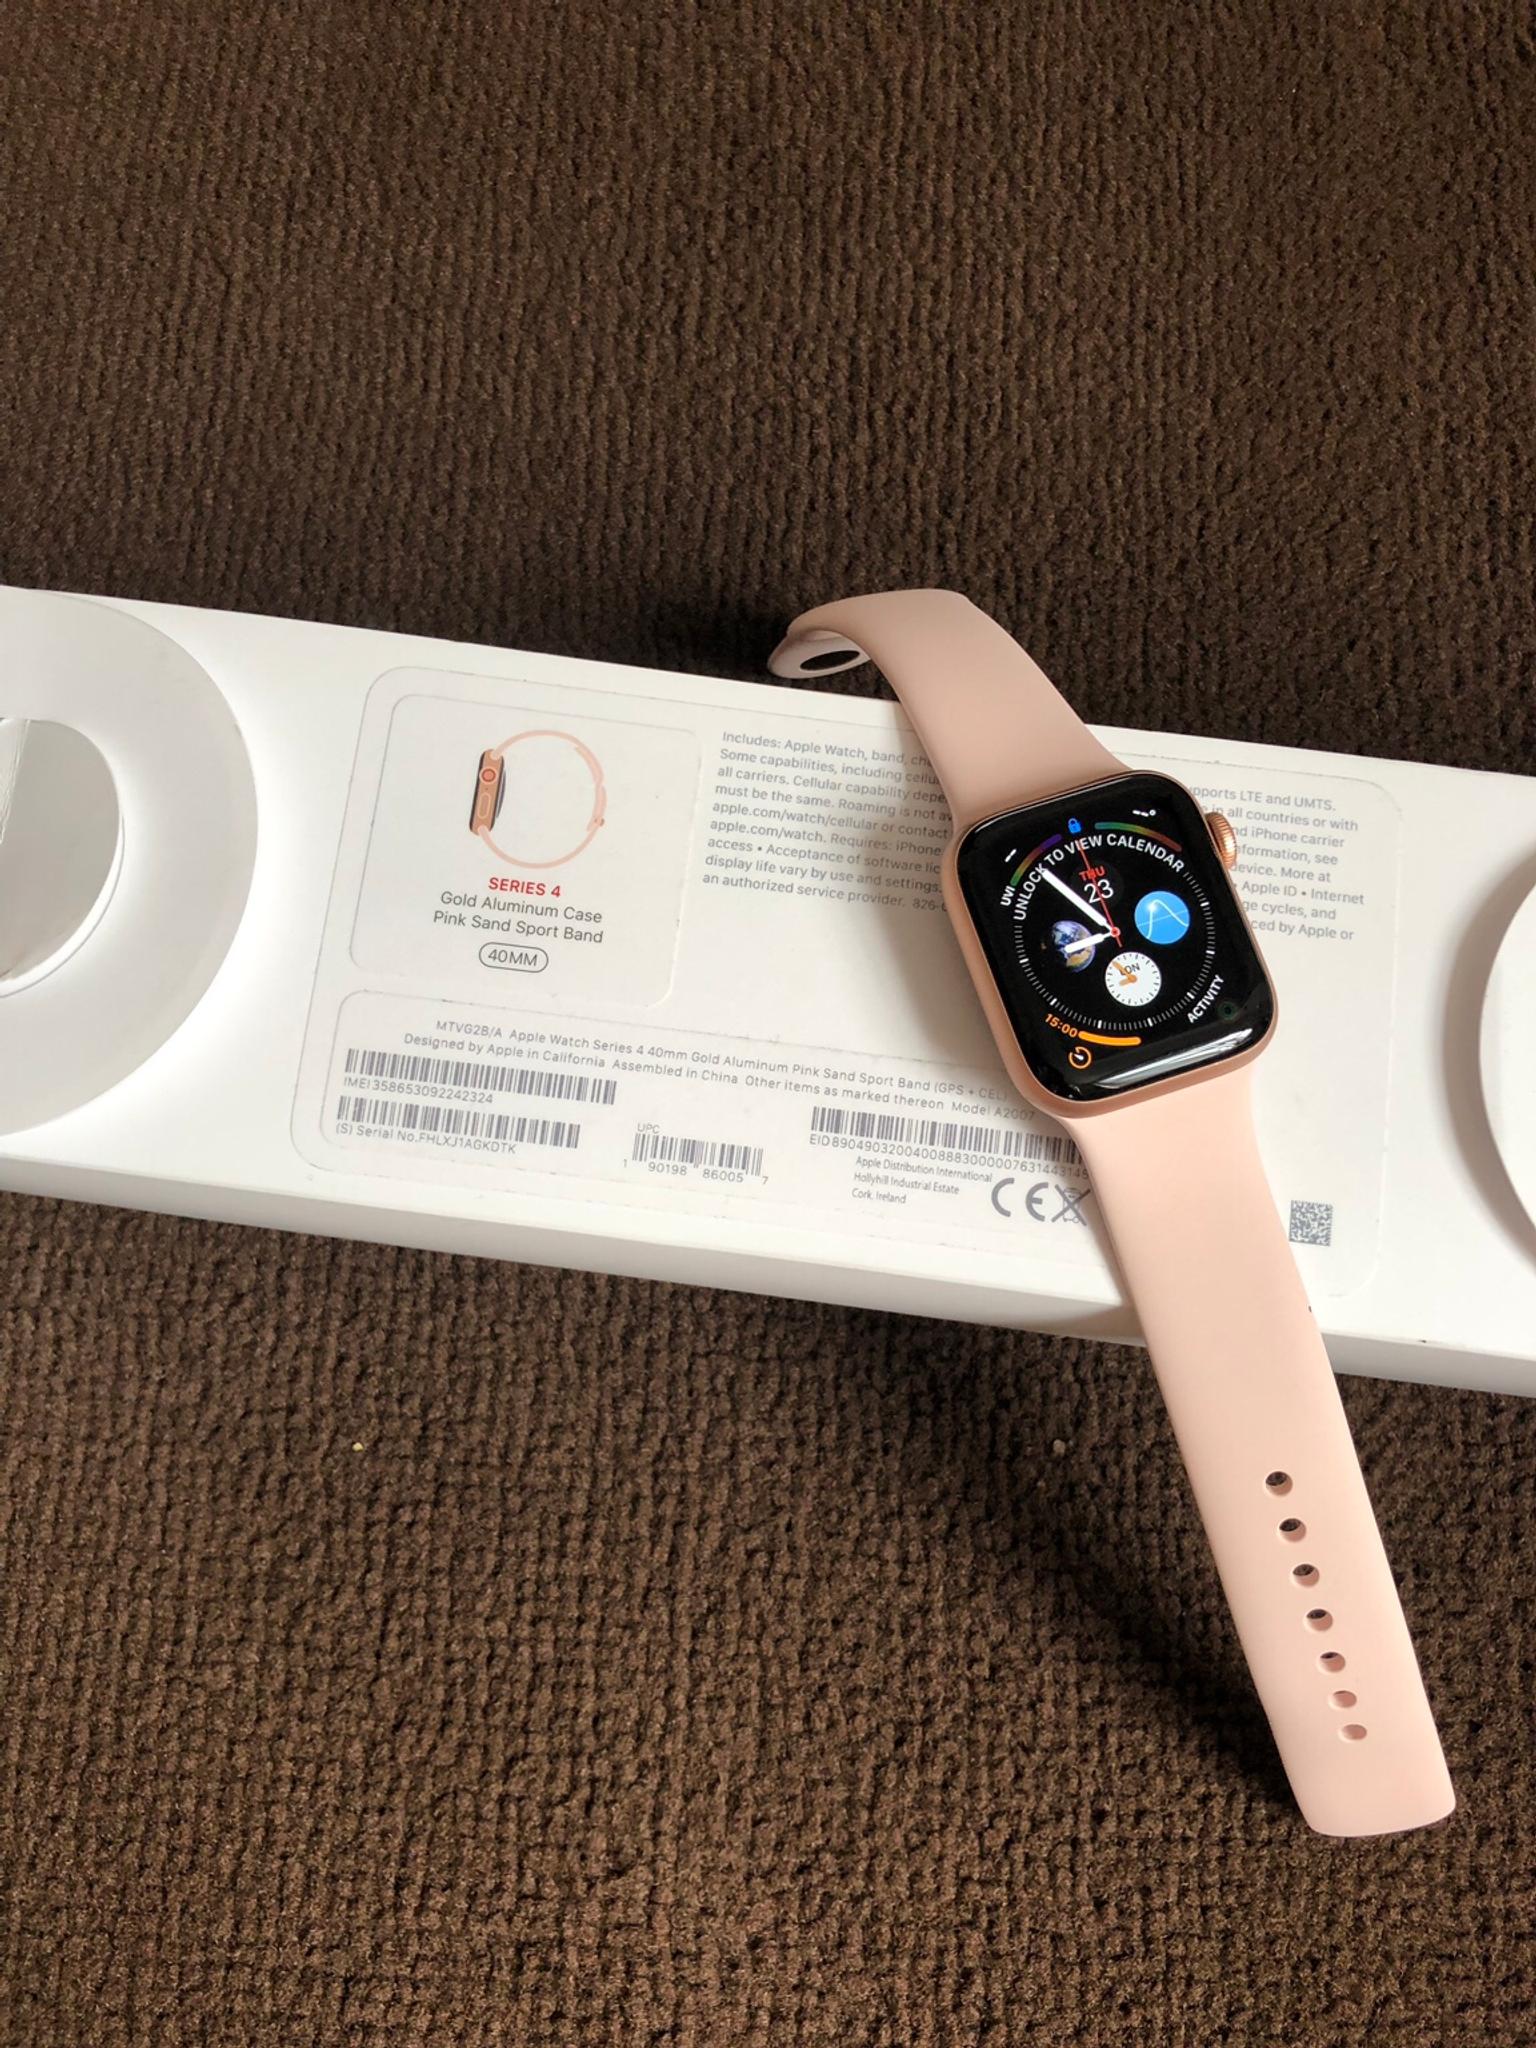 apple watch series 4 40mm gps cellular rose gold